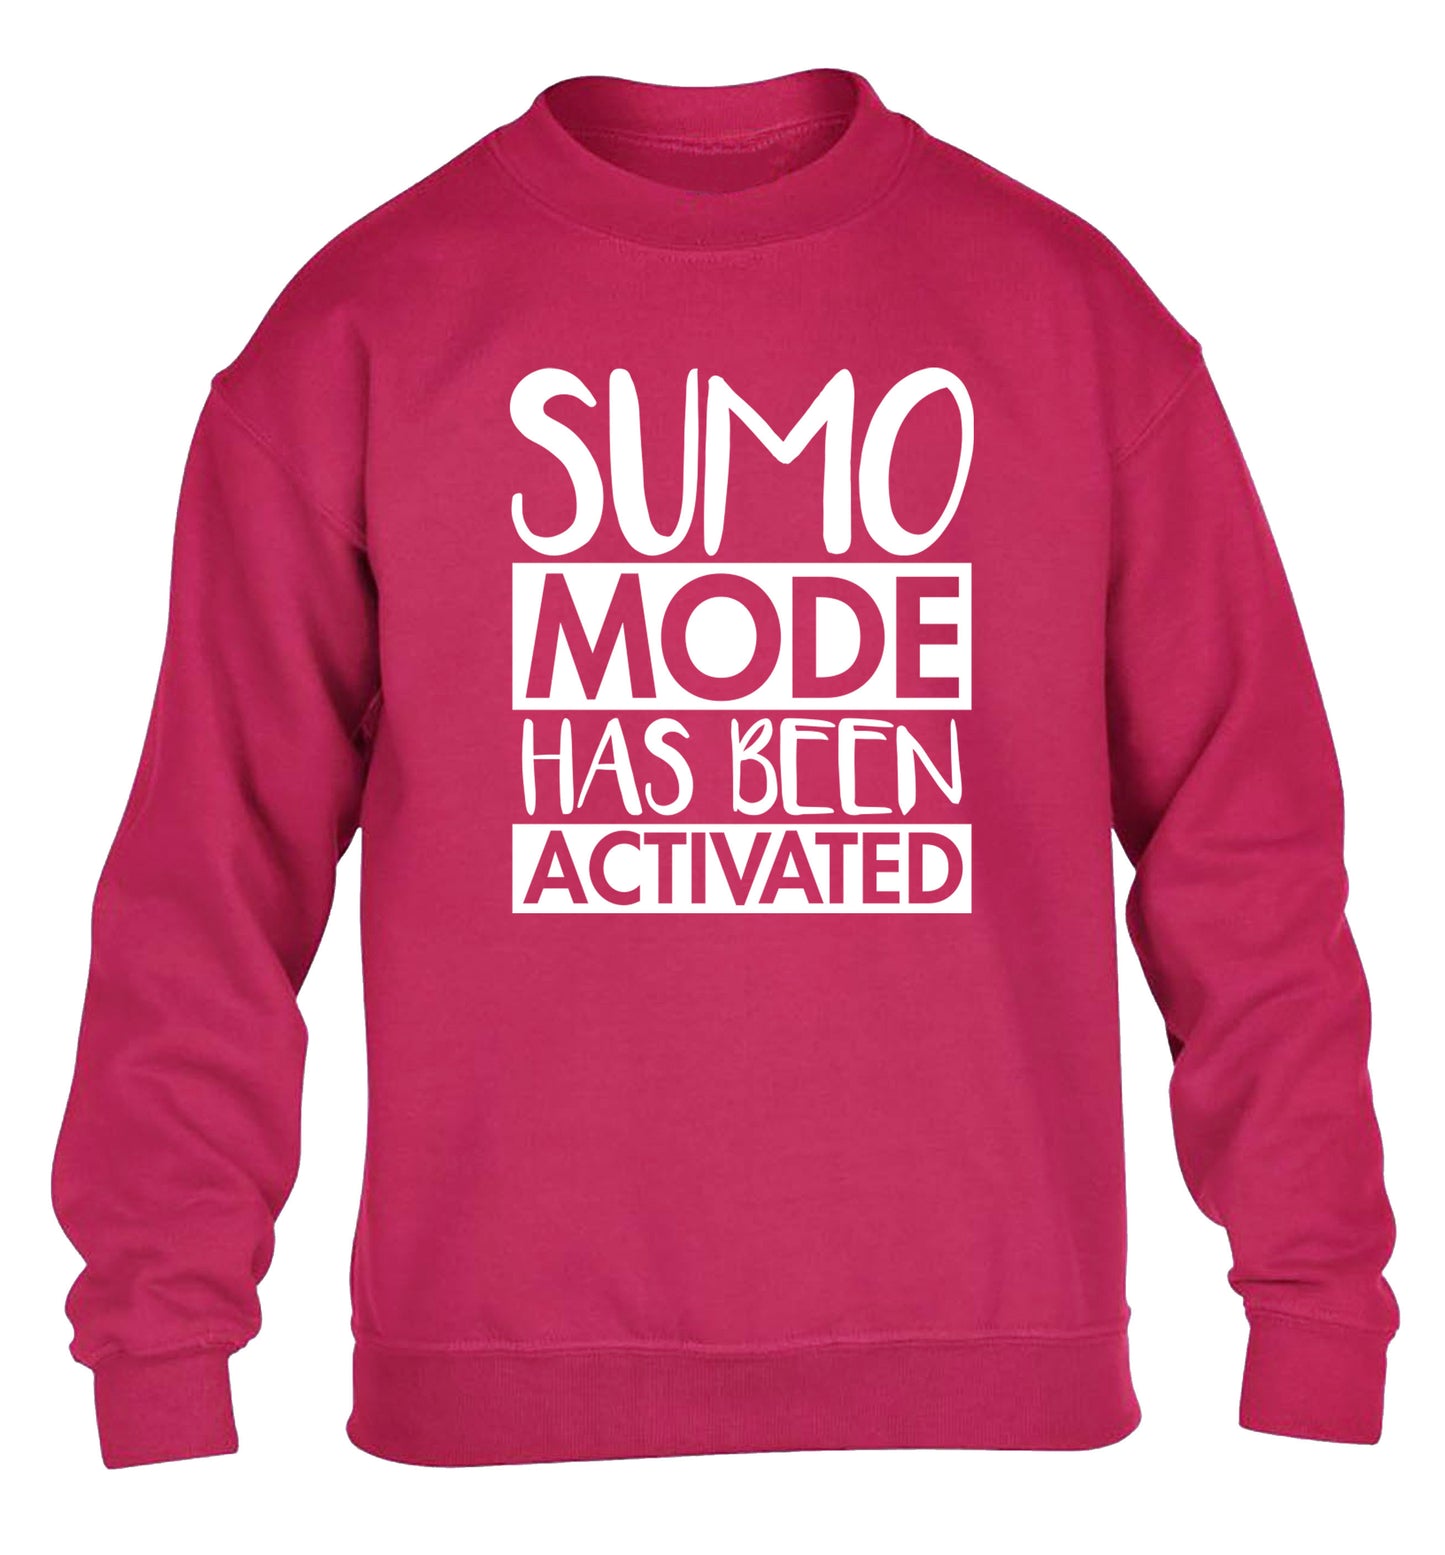 Sumo mode activated children's pink sweater 12-14 Years